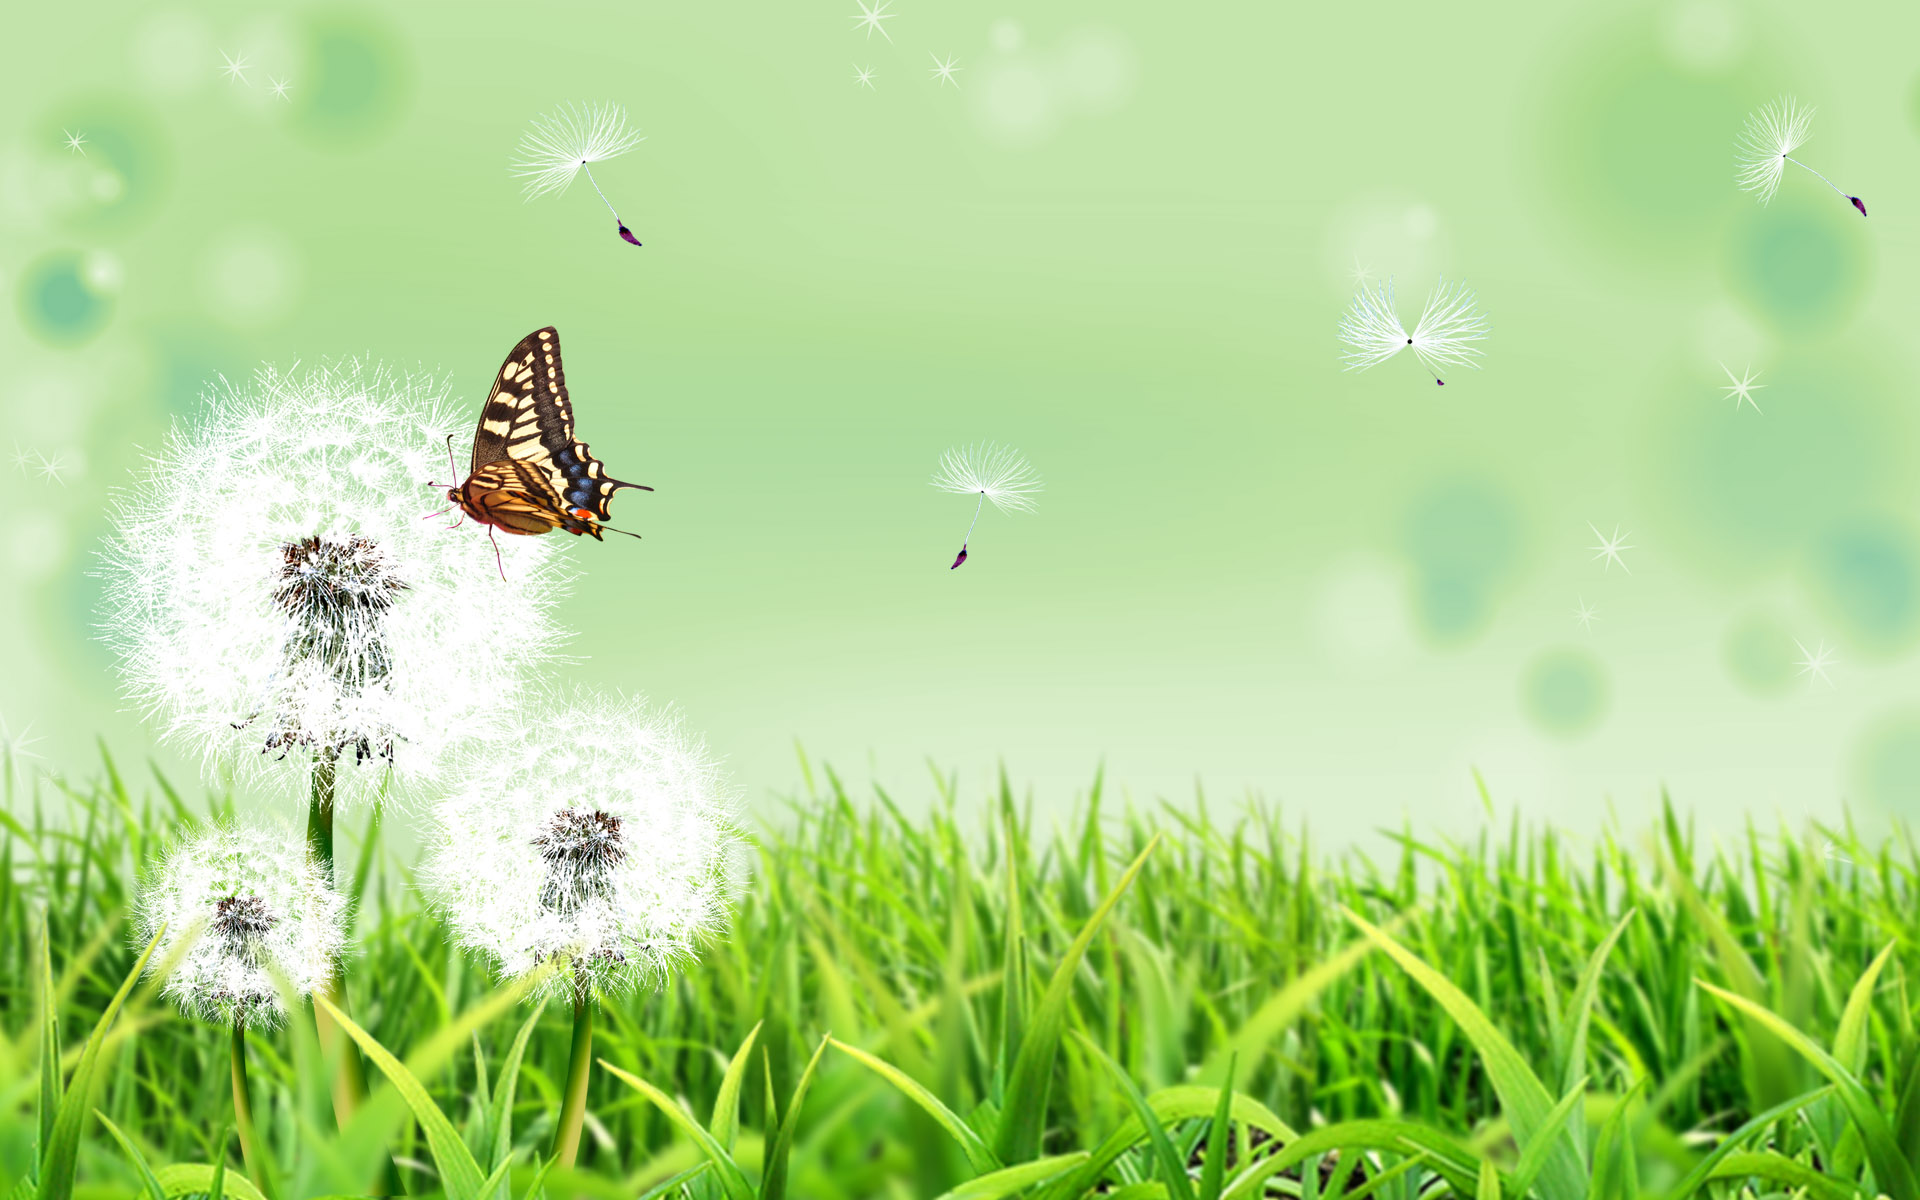 Scenery Wallpaper Includes Dandelion And Butterfly Doing Good